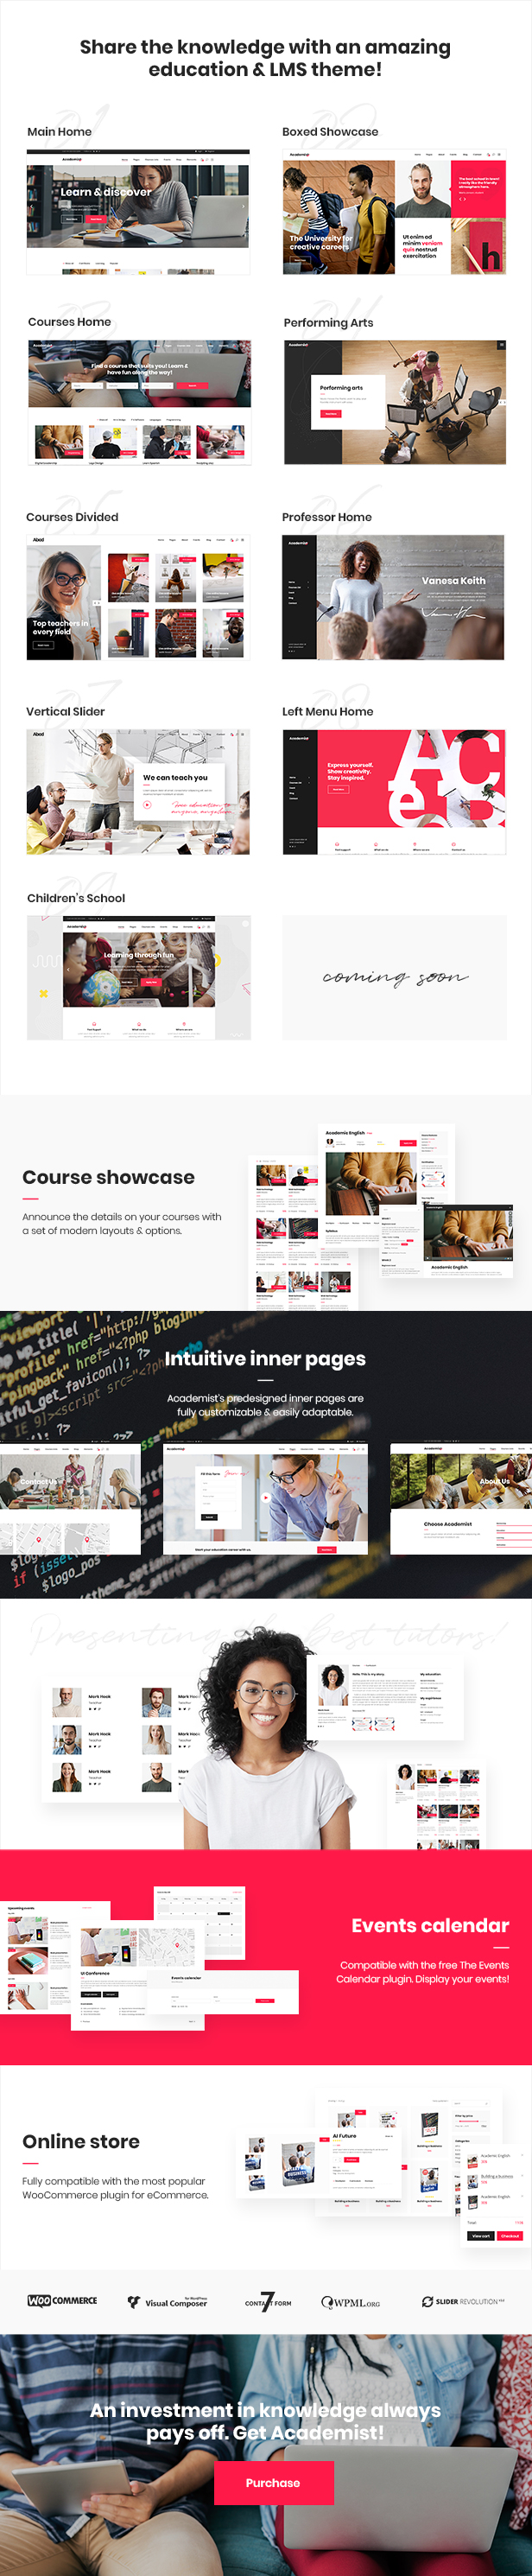 WordPress theme Academist - A Modern Learning Management System and Education Theme (Education)